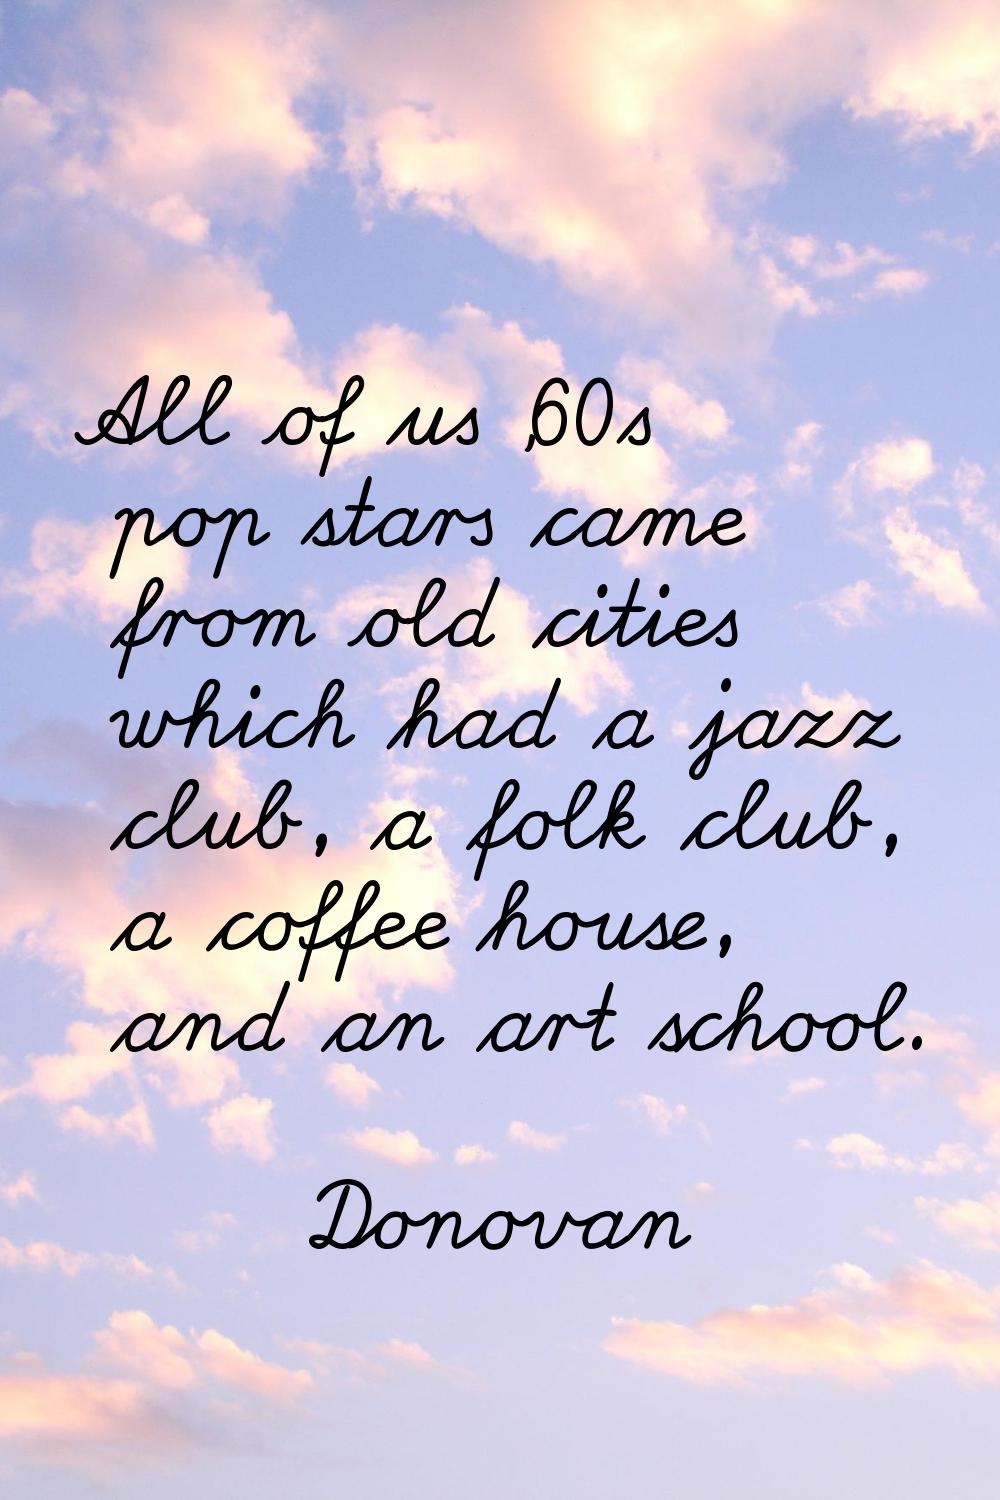 All of us '60s pop stars came from old cities which had a jazz club, a folk club, a coffee house, a